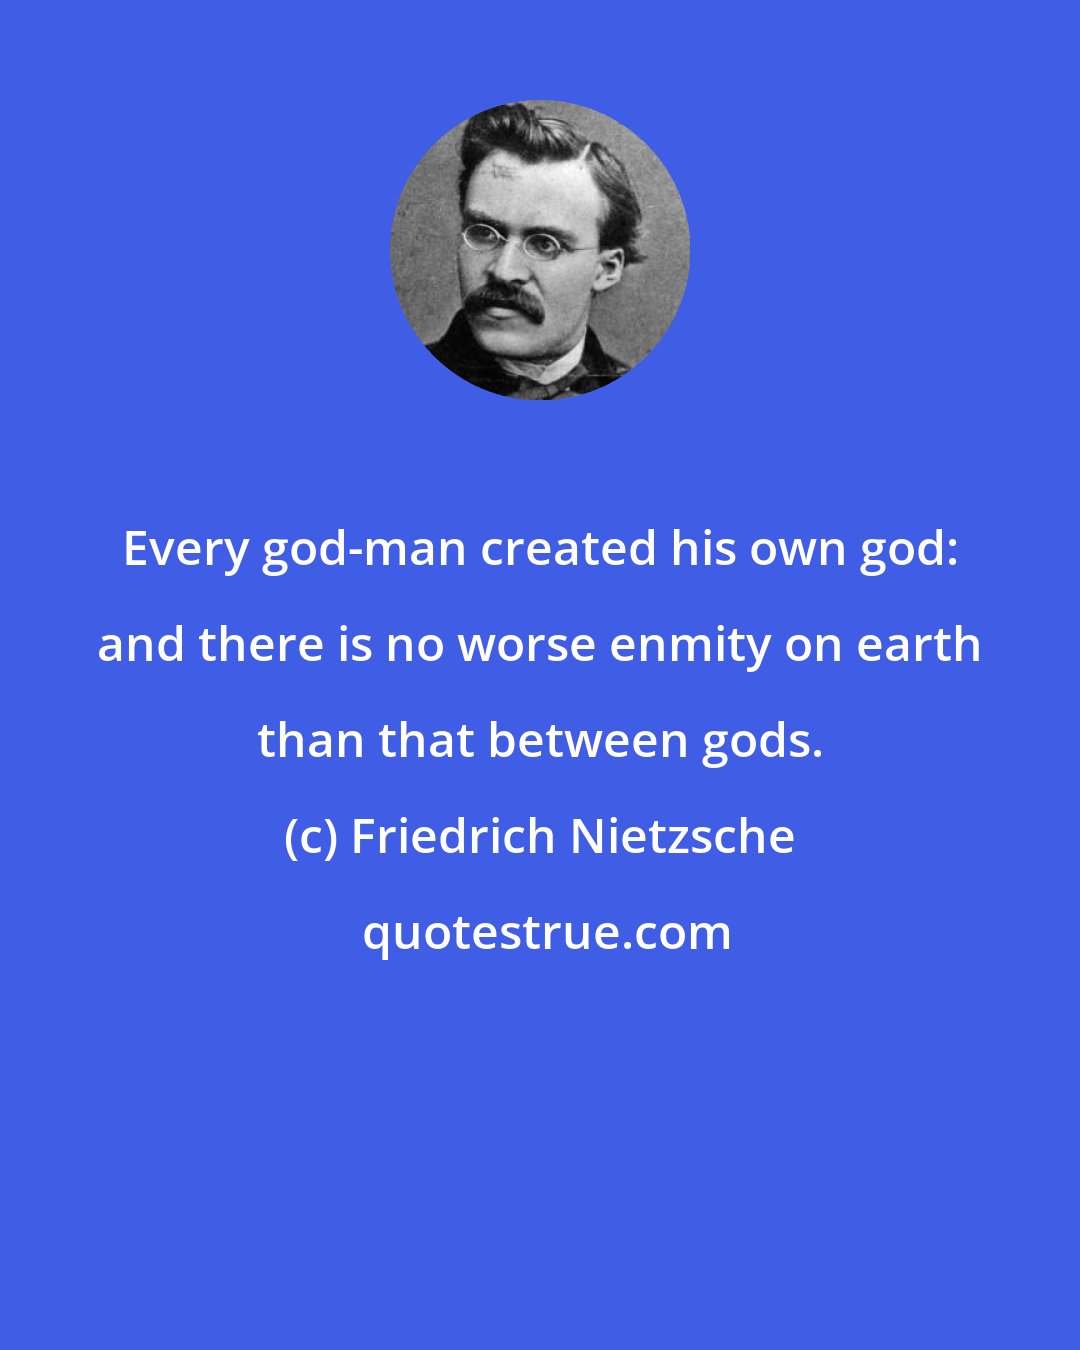 Friedrich Nietzsche: Every god-man created his own god: and there is no worse enmity on earth than that between gods.